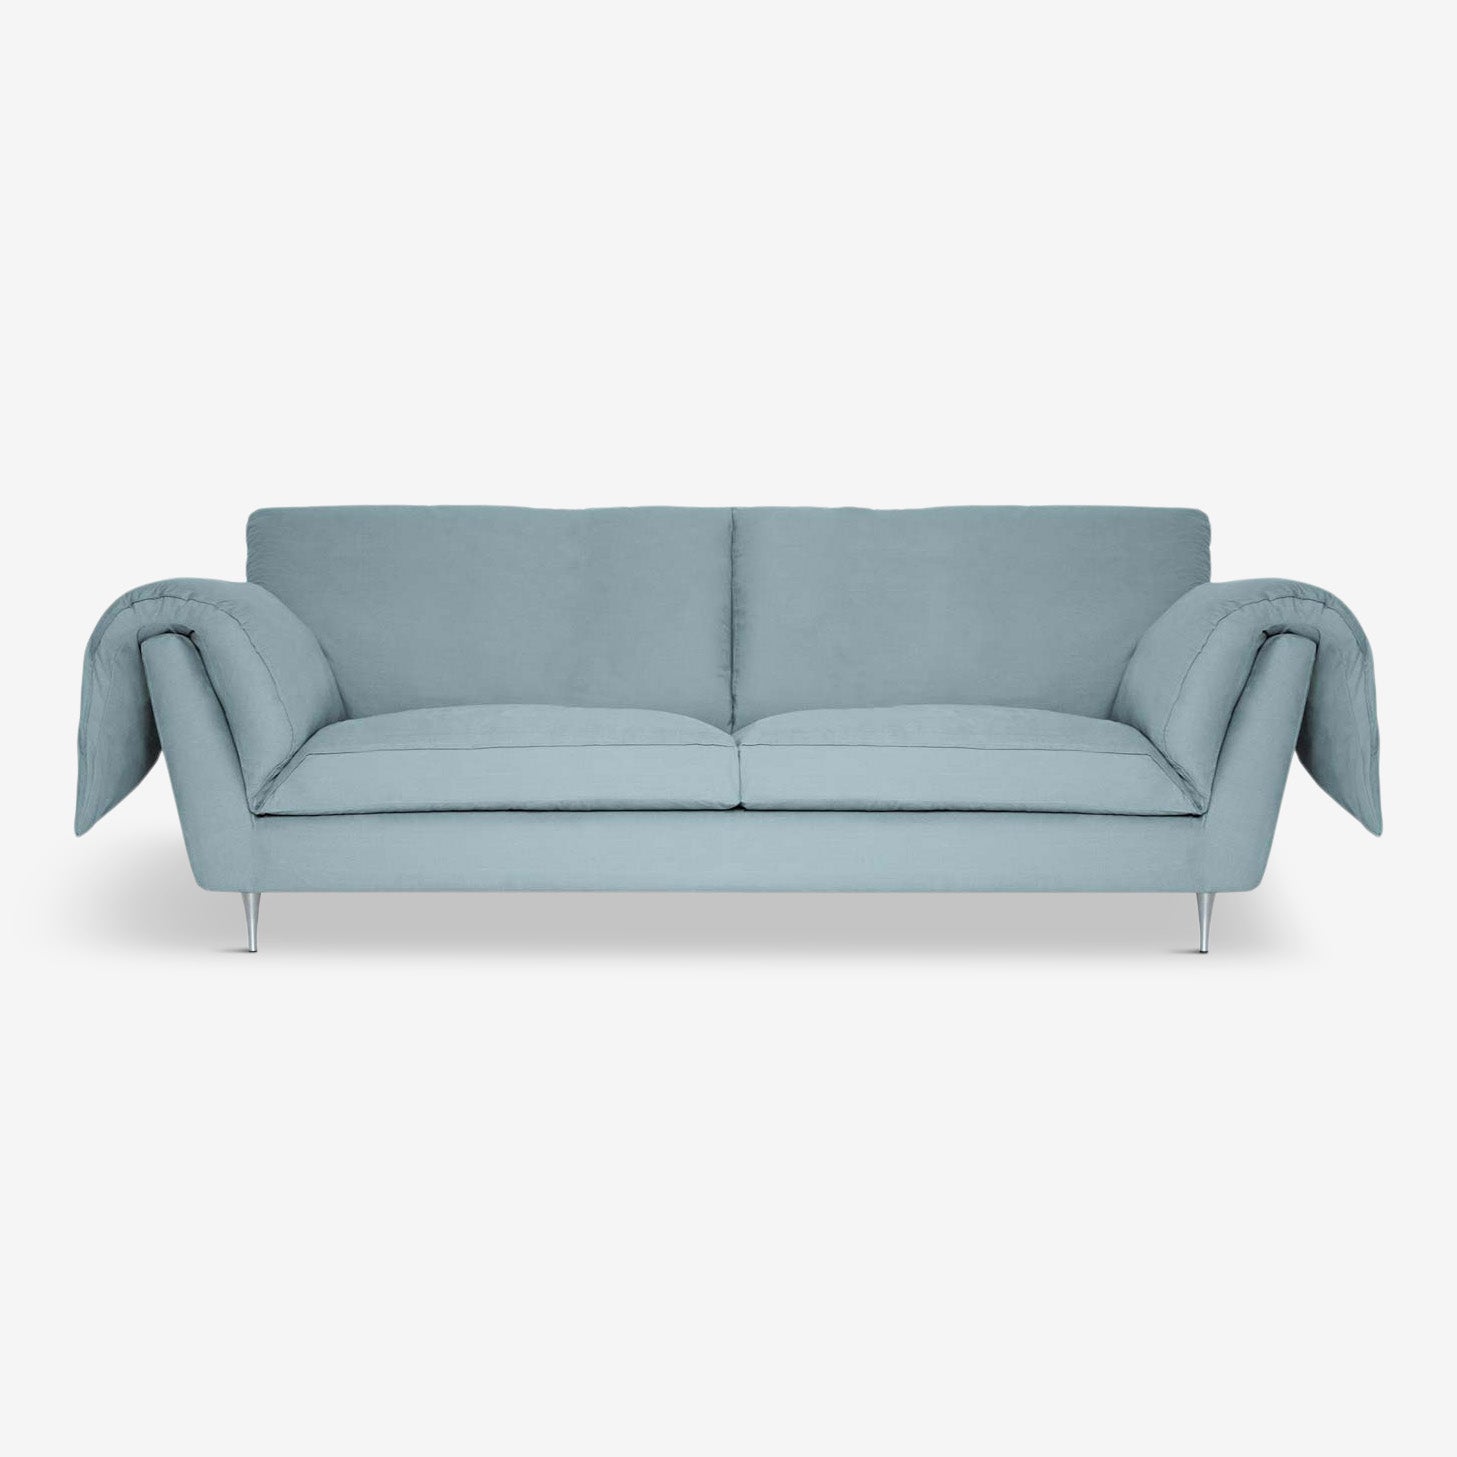 eco friendly sofa, green natural linen textile, casquet three seater sofa by ddp studio